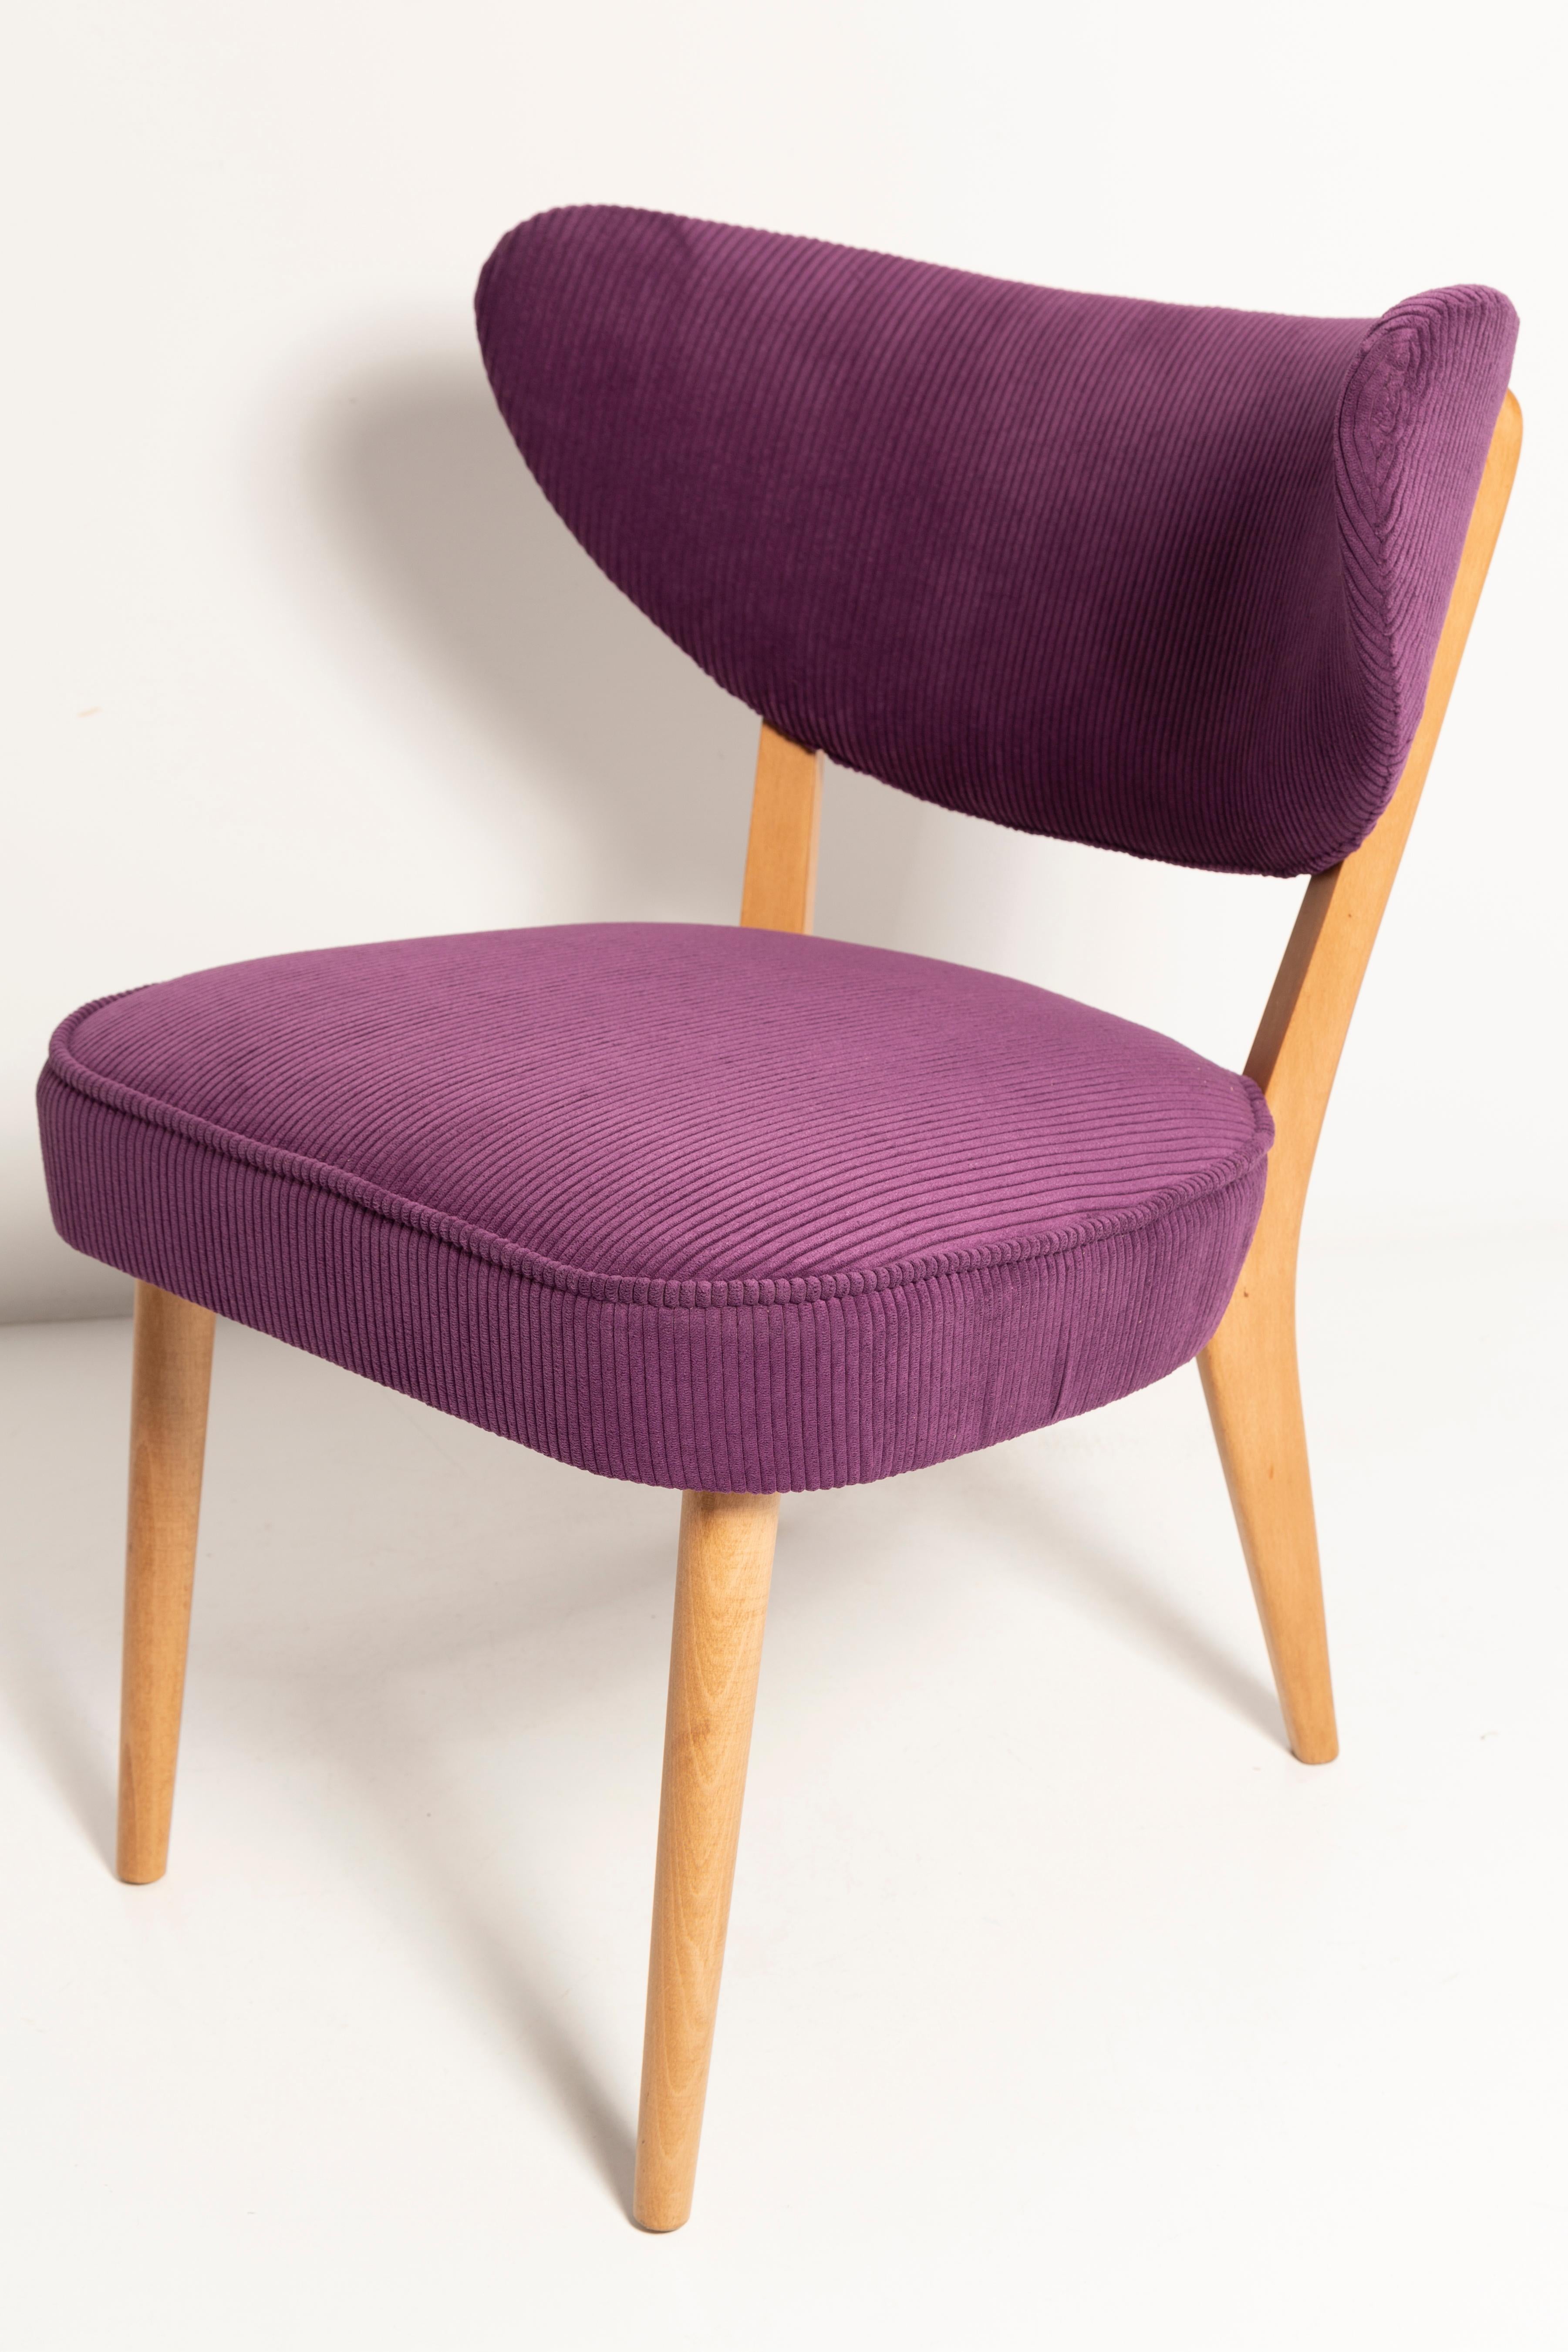 Pair of Midcentury Style Violet Velvet Club Chairs, by Vintola Studio, Europe For Sale 2